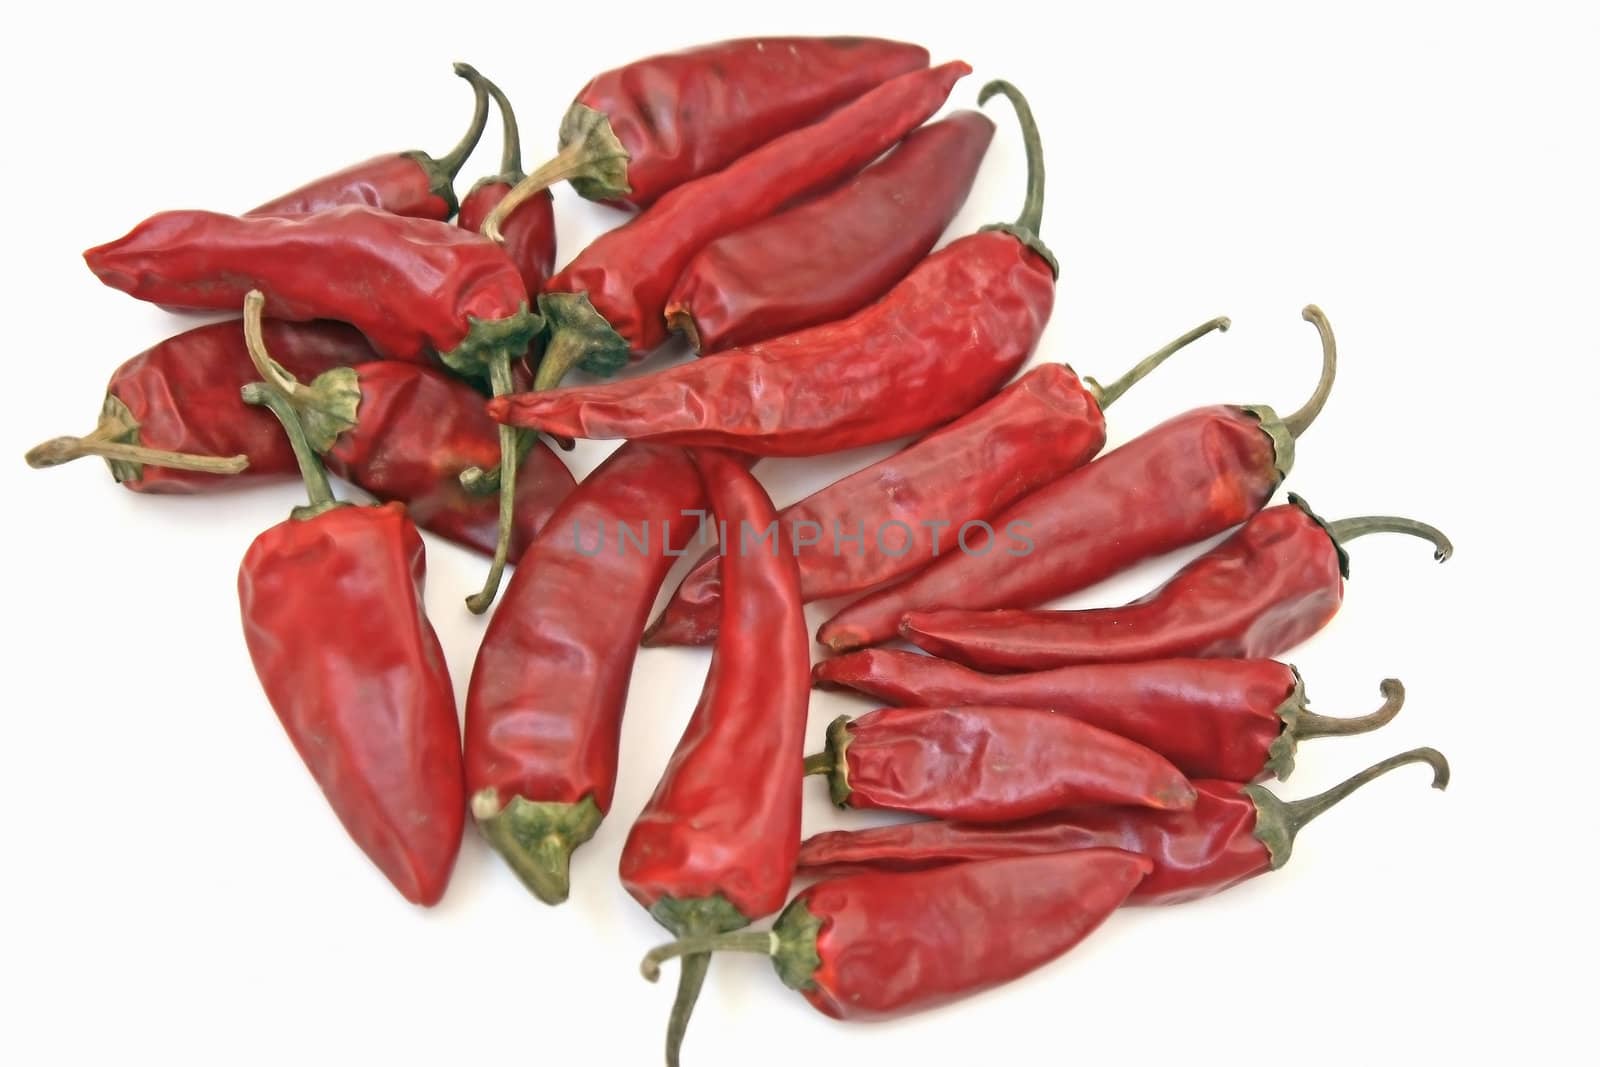 Heap of brilliant red bitter pepper on a white background.